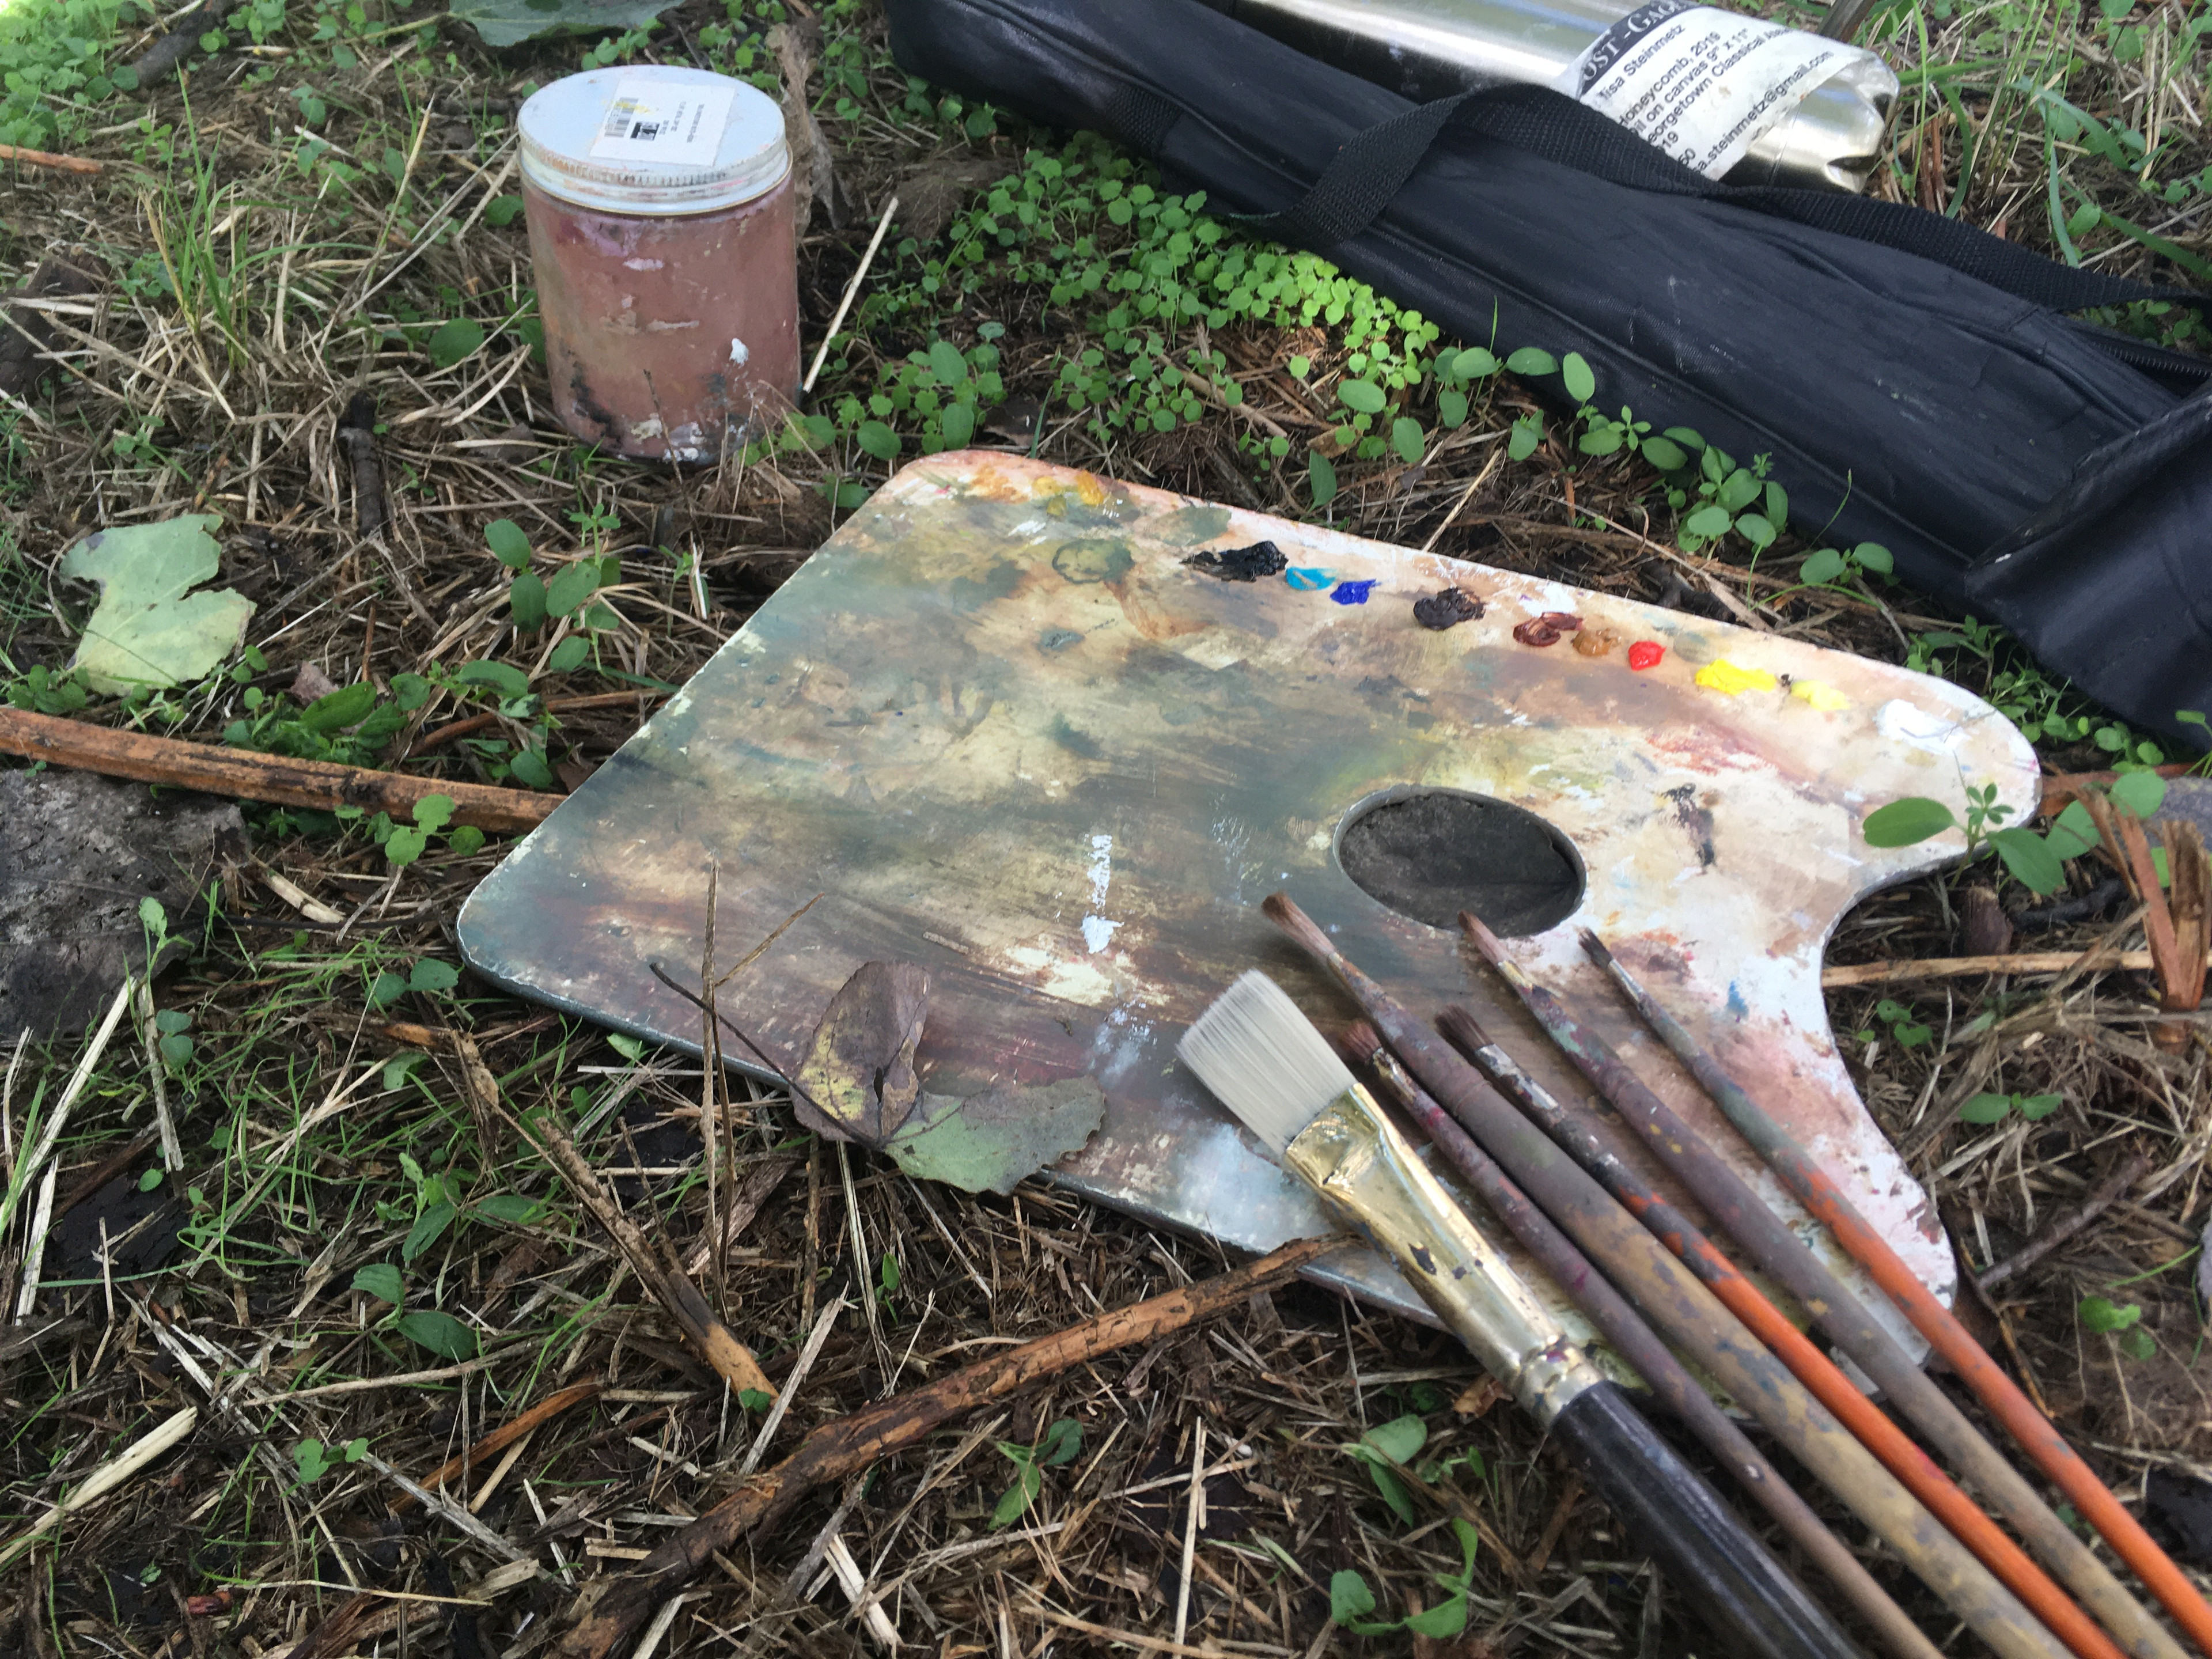 For my set up, I like using a small hand-held palette, various brush sizes, gamsol in a glass jar, and oil paints. I also bring along a foldup chair and a light red easel so I can clip my painting to it. 